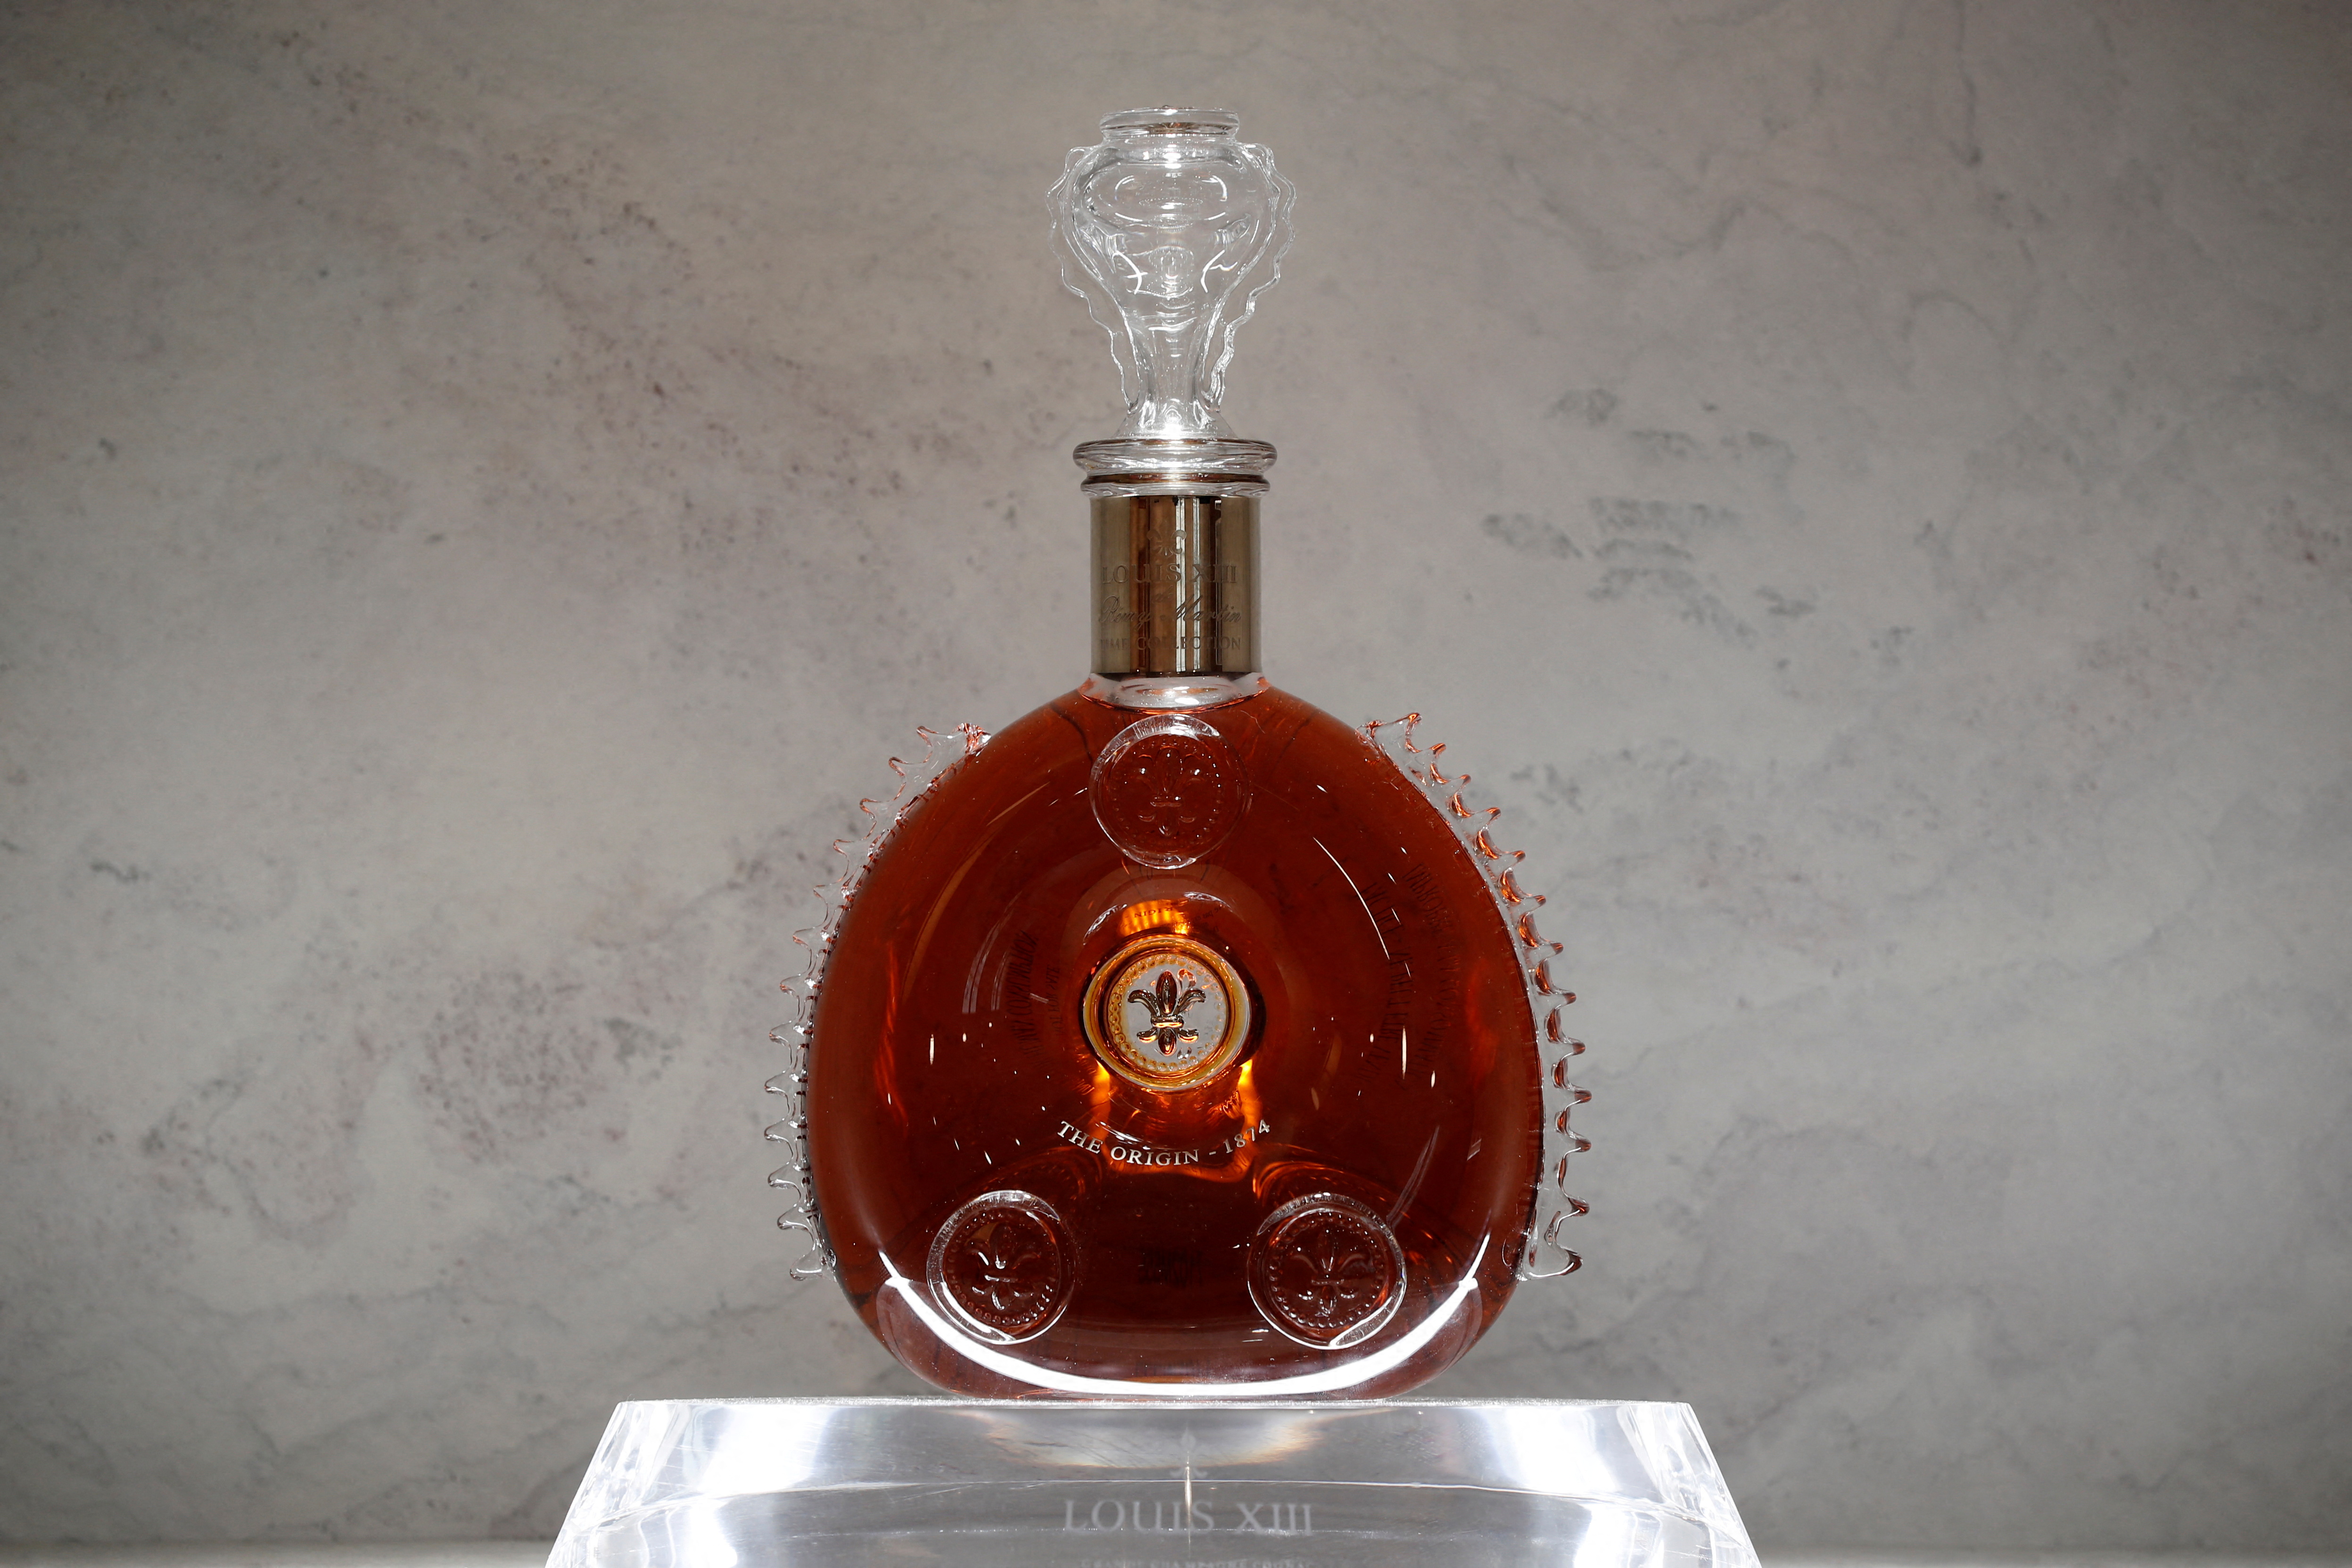 A bottle of Remy Martin LOUIS XIII cognac is displayed at the Remy Cointreau SA headquarters in Paris